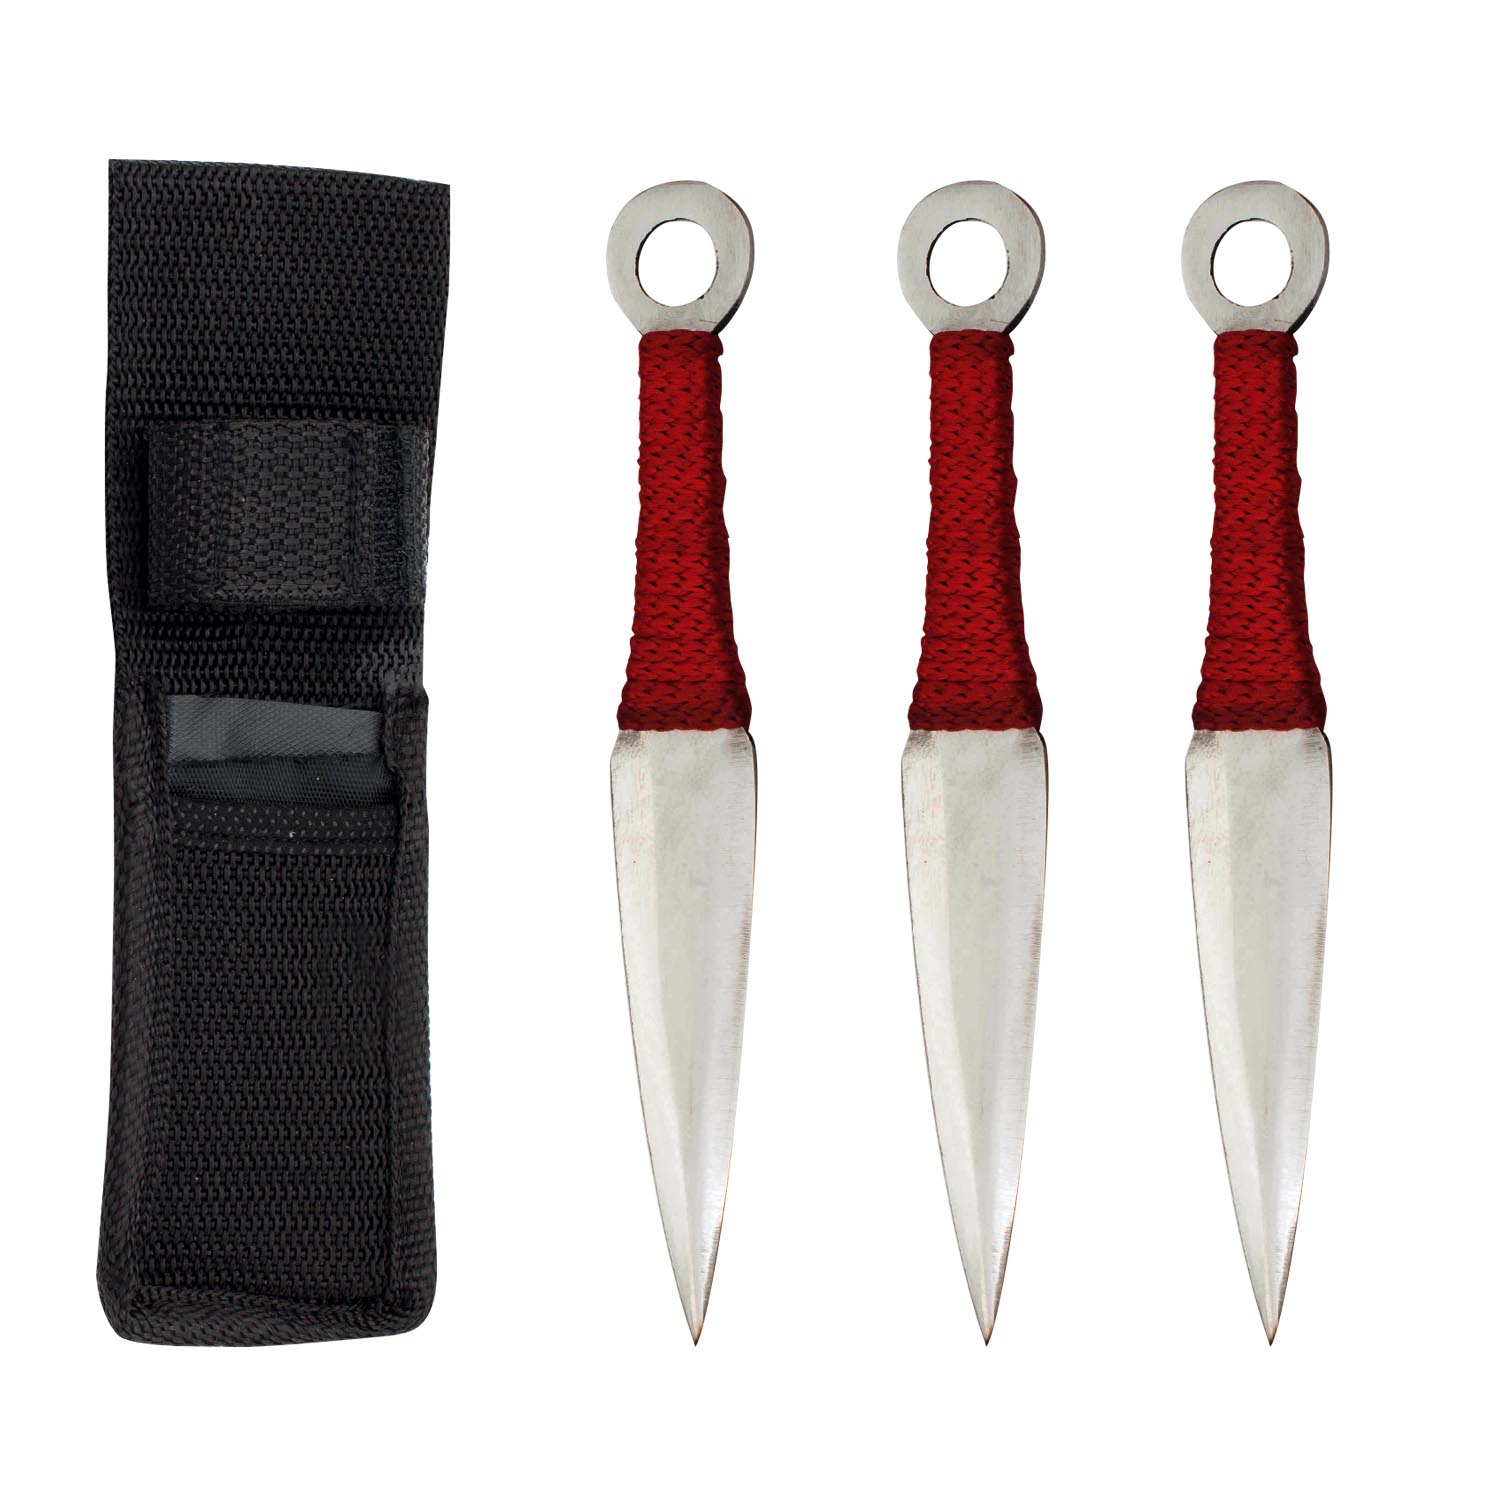 6.5 Inch Throwing Knife Set (Set of 3)- Silver and Red